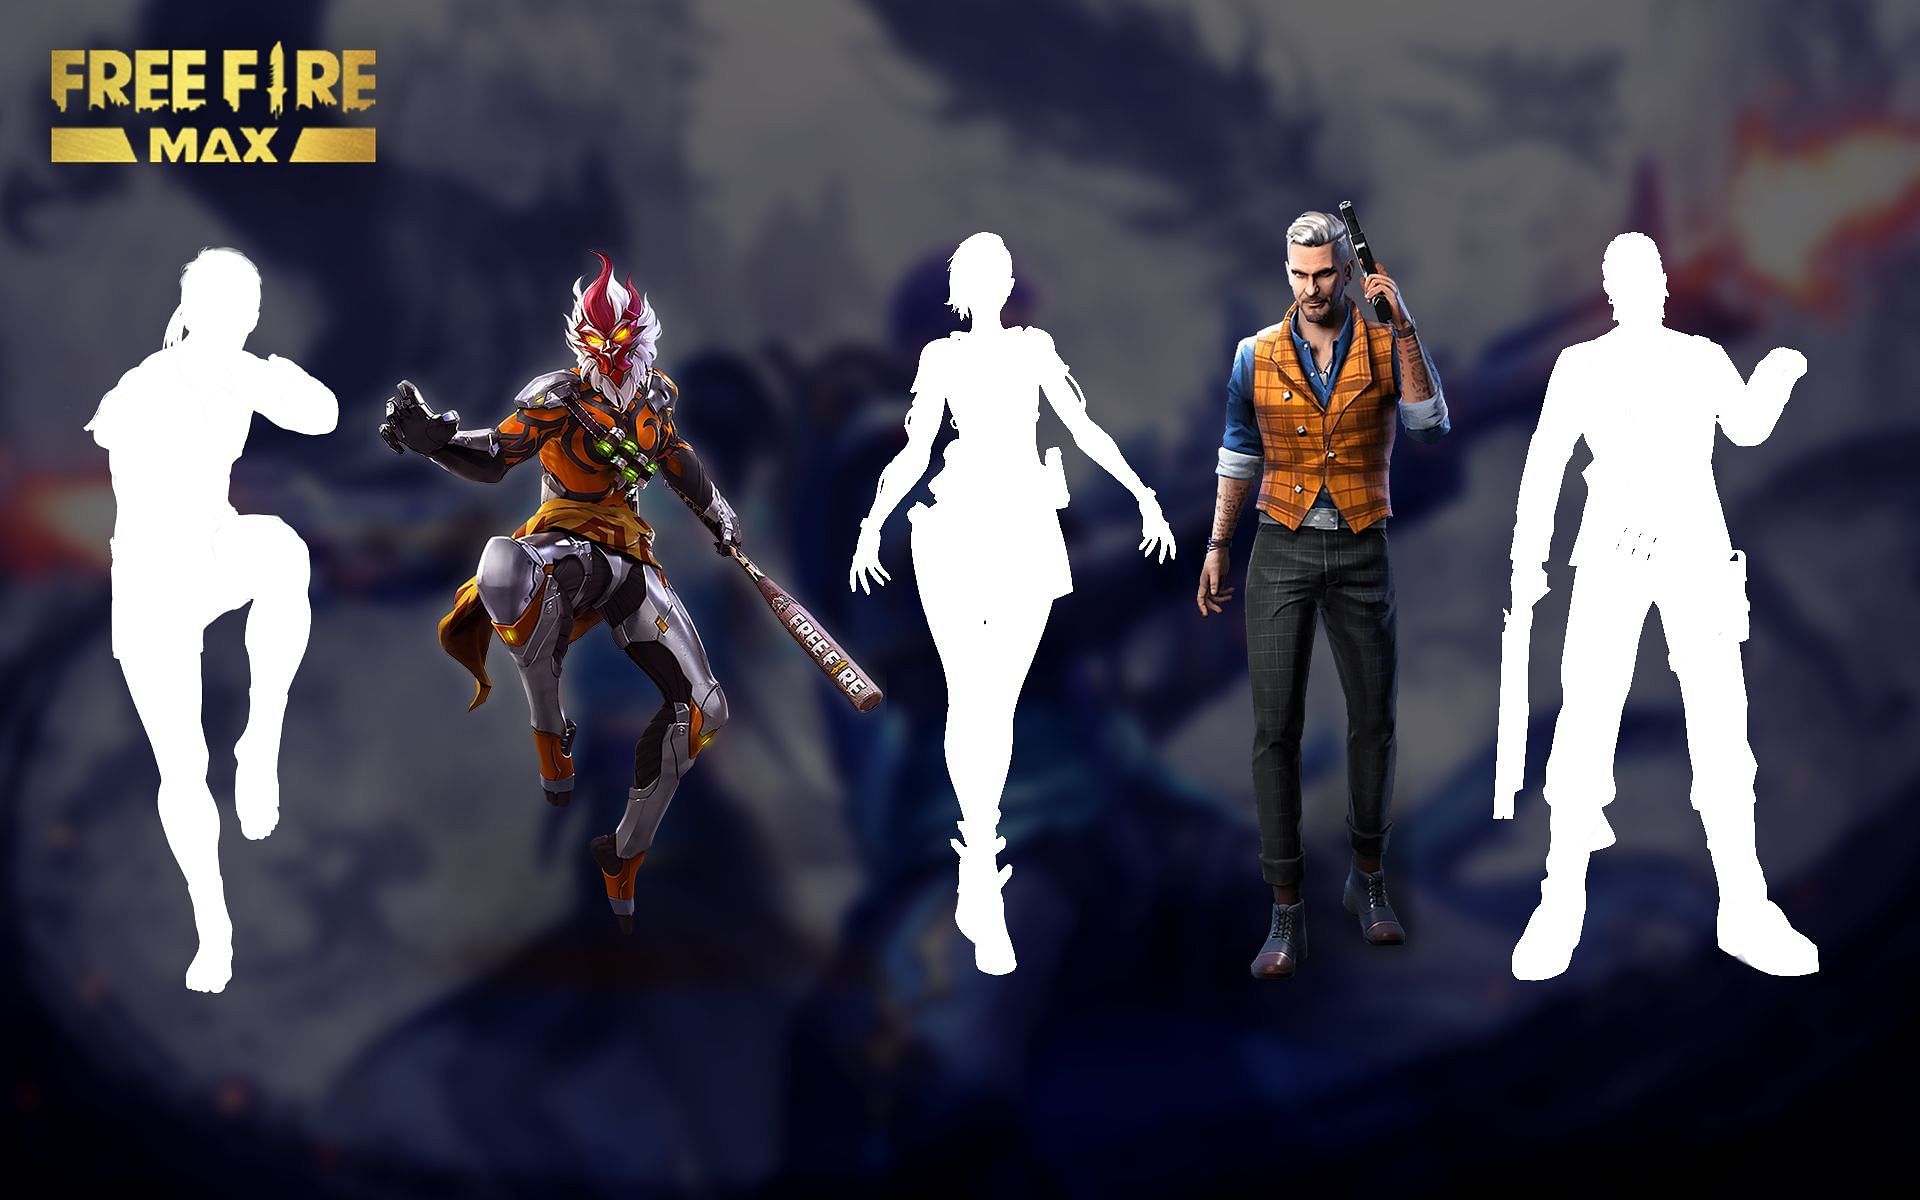 These characters are good for the Factory Challenge mode in Free Fire MAX (Image Sportskeeda)